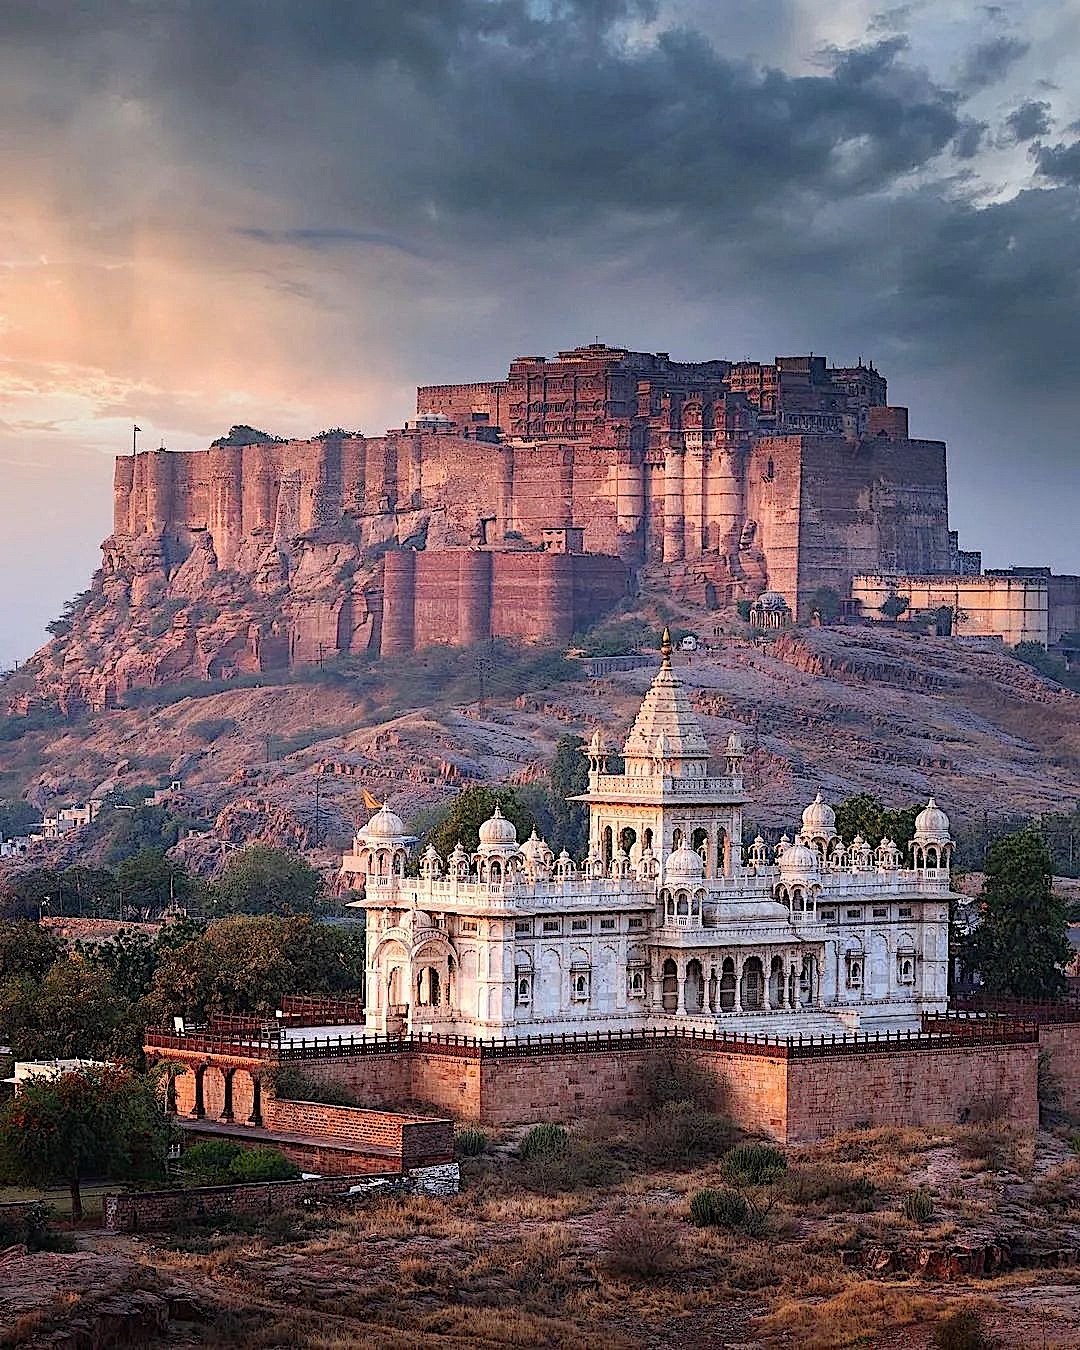 Jodhpur Rajasthan is one of the largest forts in India Built in around 1459 by Rao Jodha